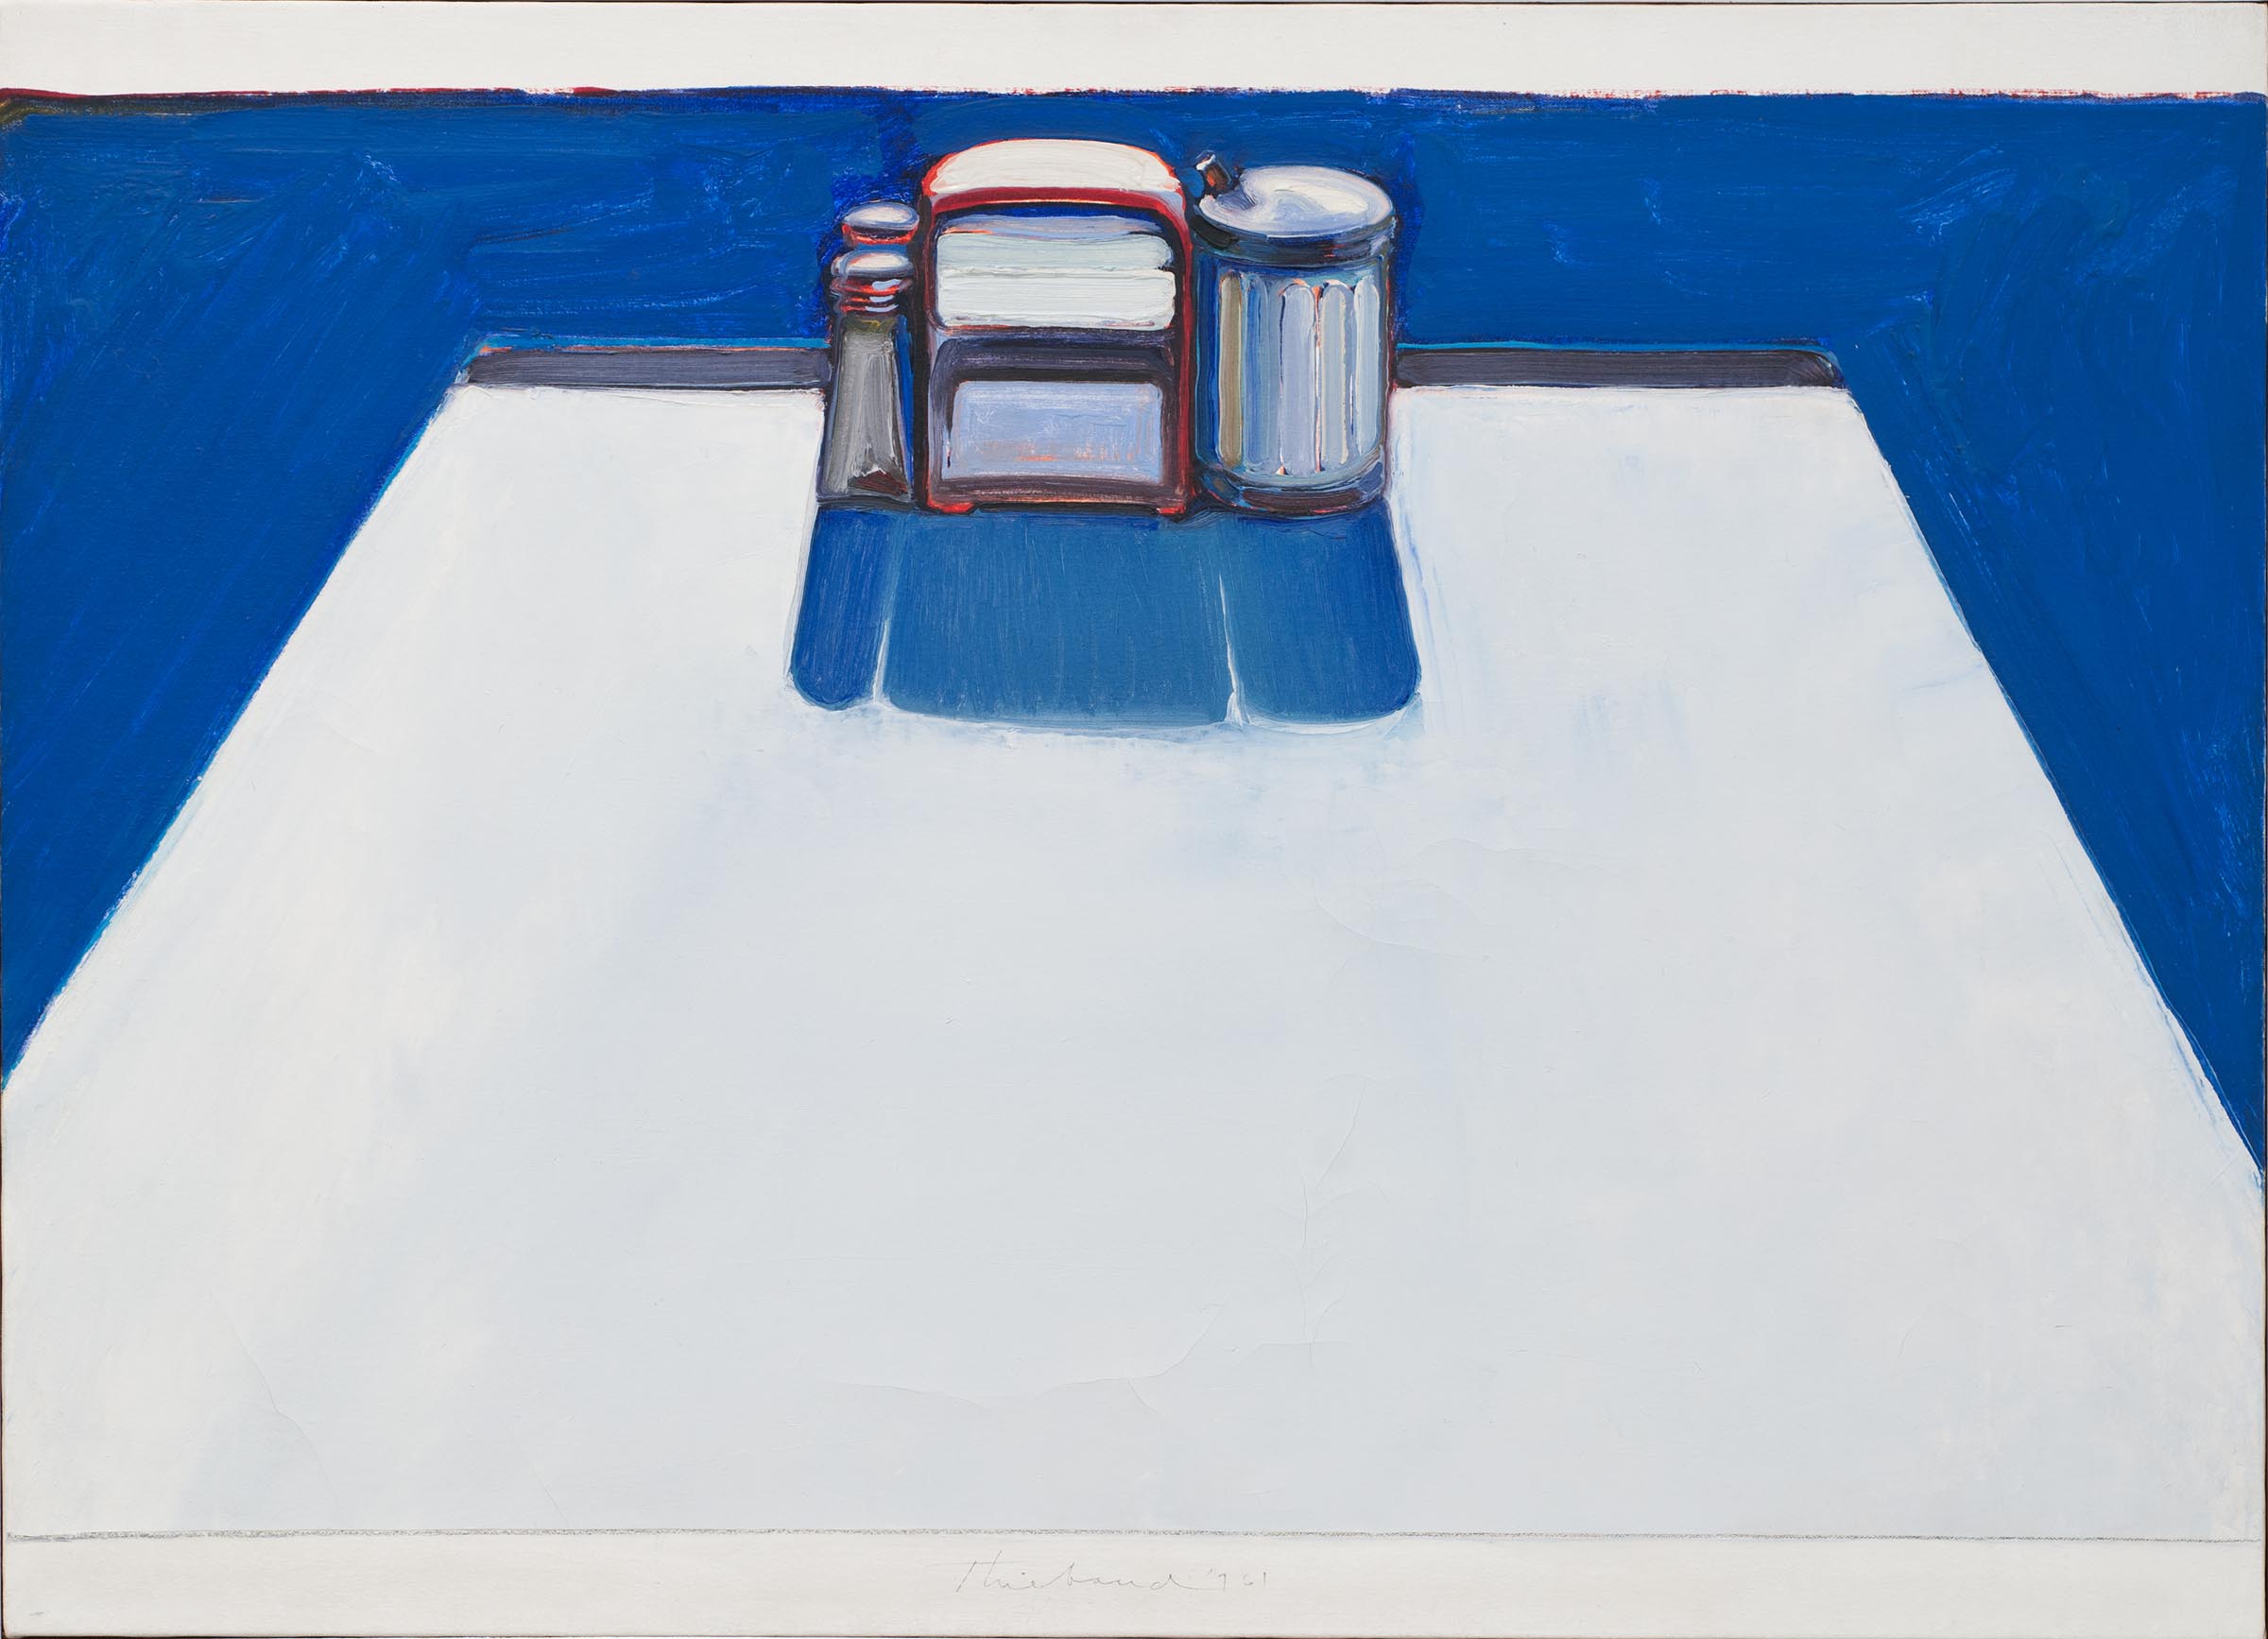 Wayne Thiebaud, “Table Setting,” 1961, oil on canvas, Gift of Dr. and Mrs. Karl Salatka